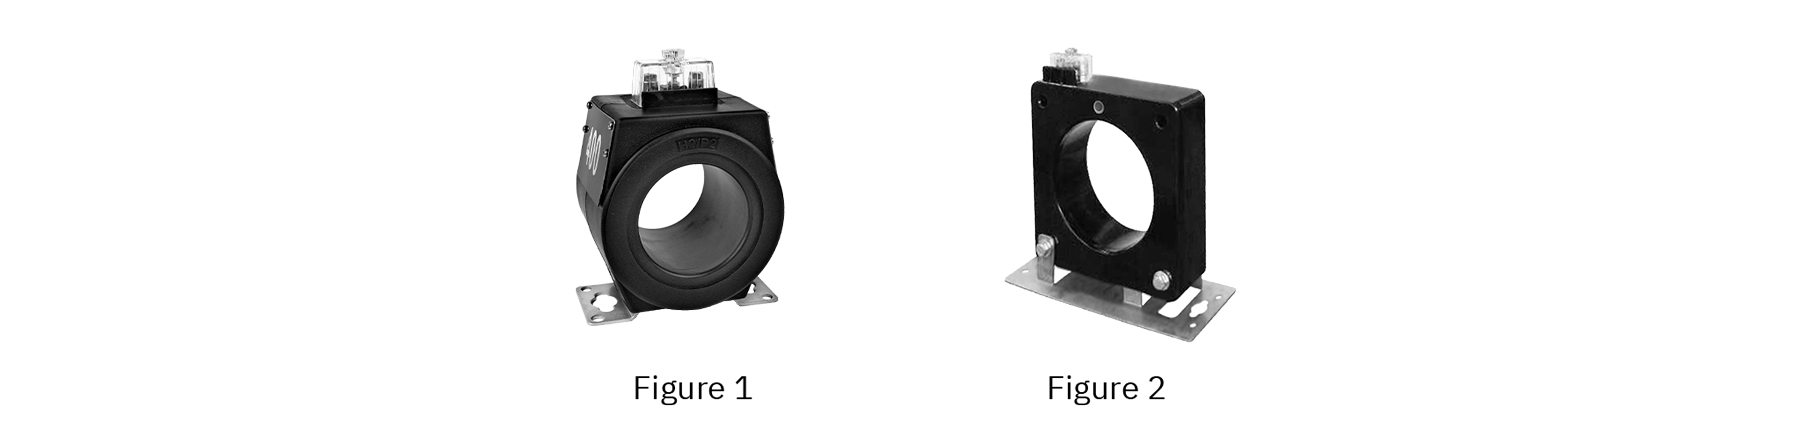 LV Current Transformer ROS-A Series - product designs